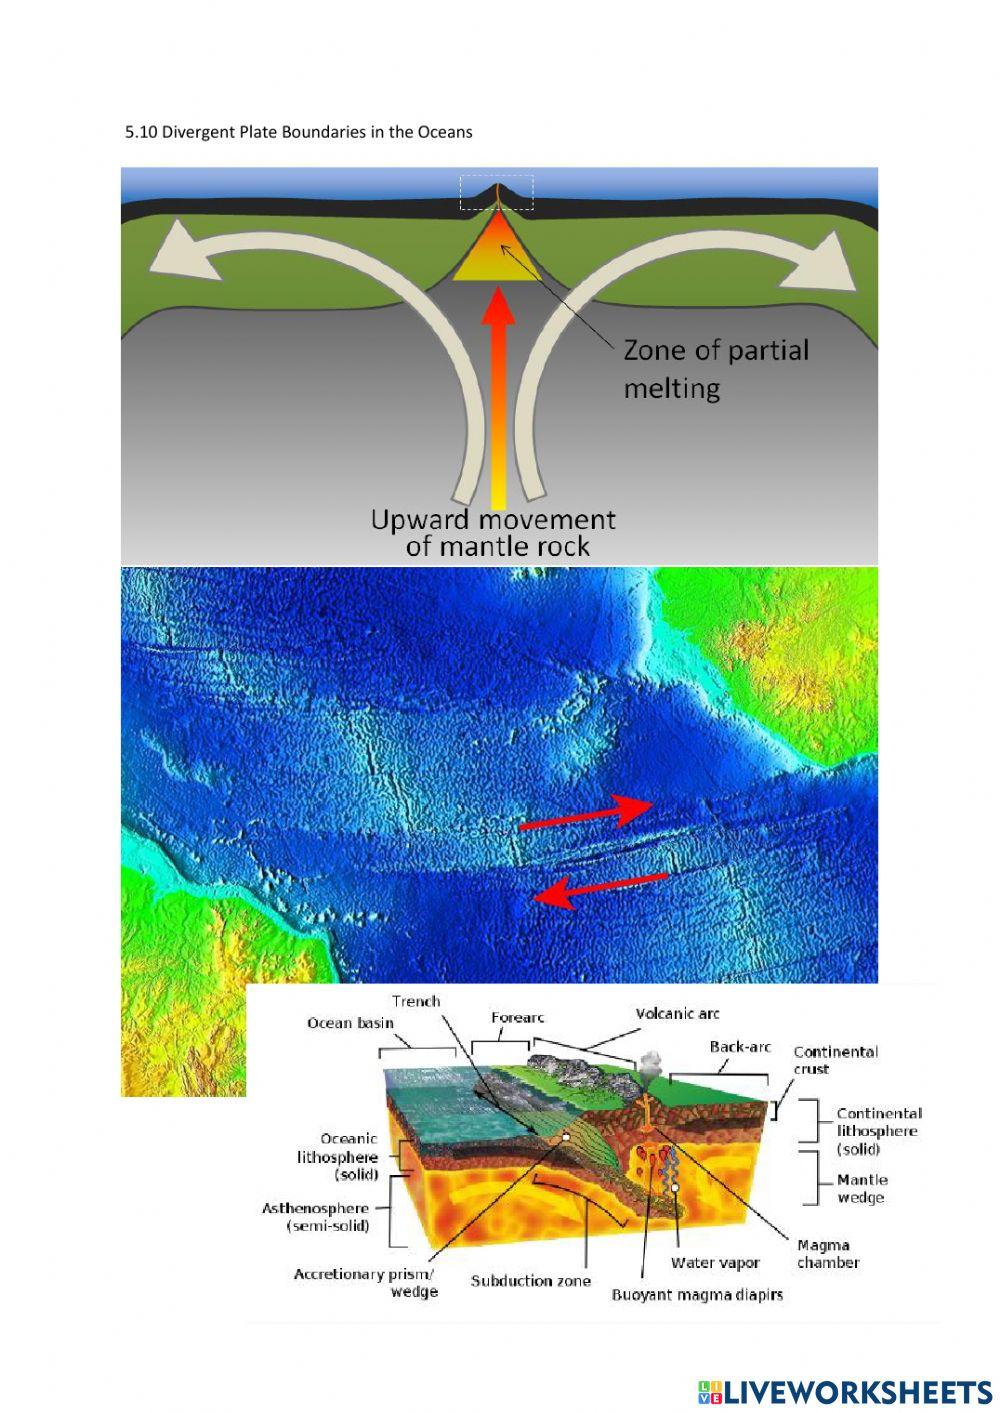 5.10 Divergent Plate Boundaries in the Oceans